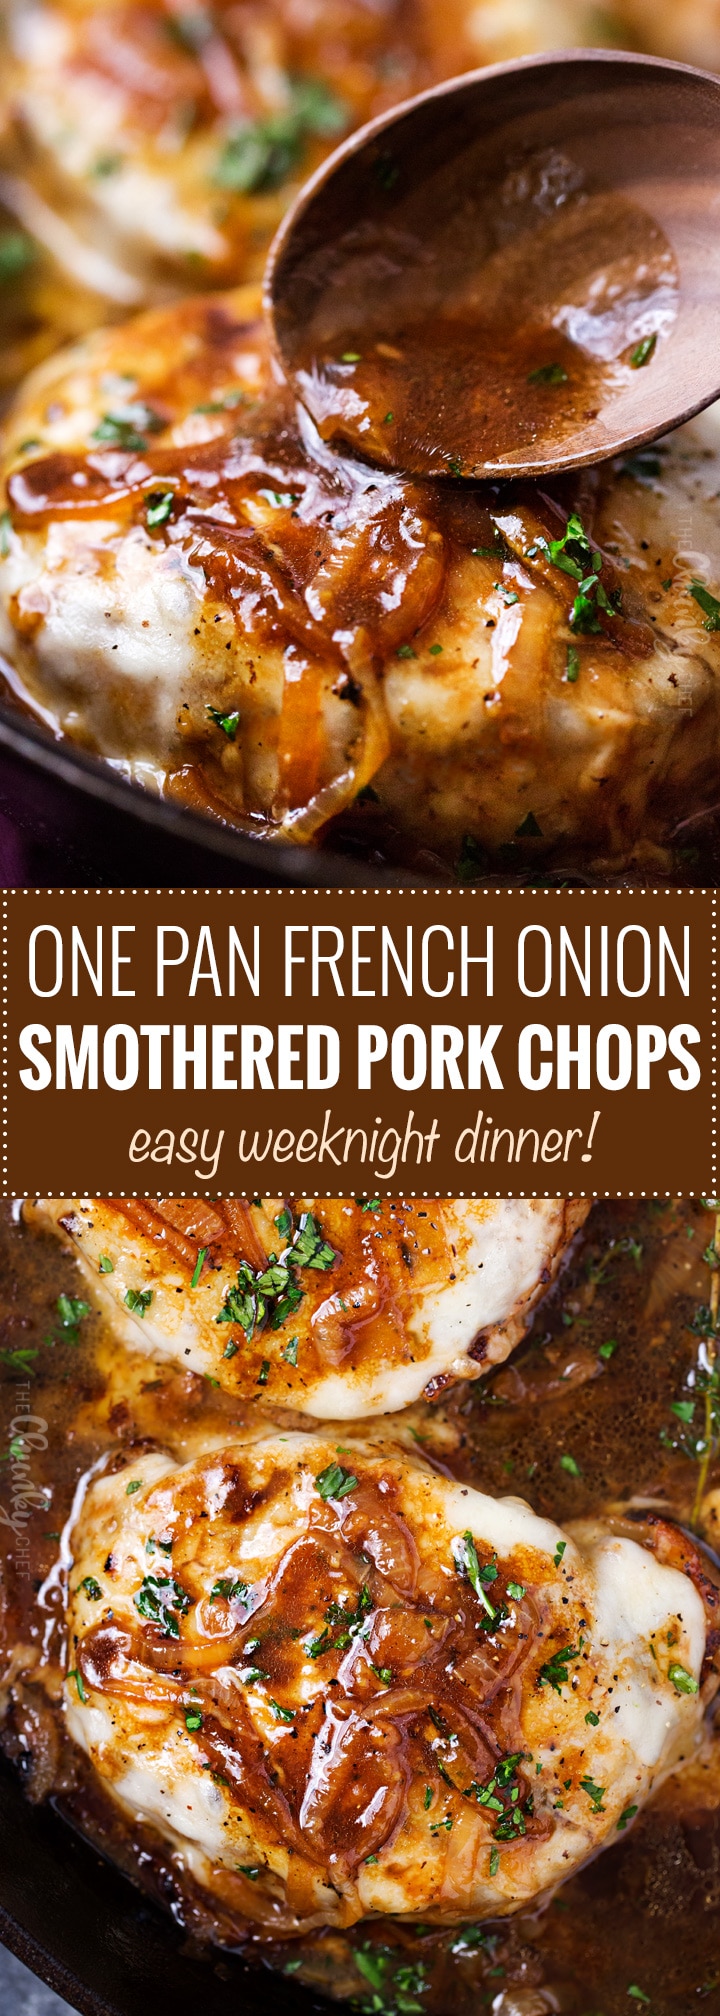 One Pan French Onion Smothered Pork Chops - The Chunky Chef